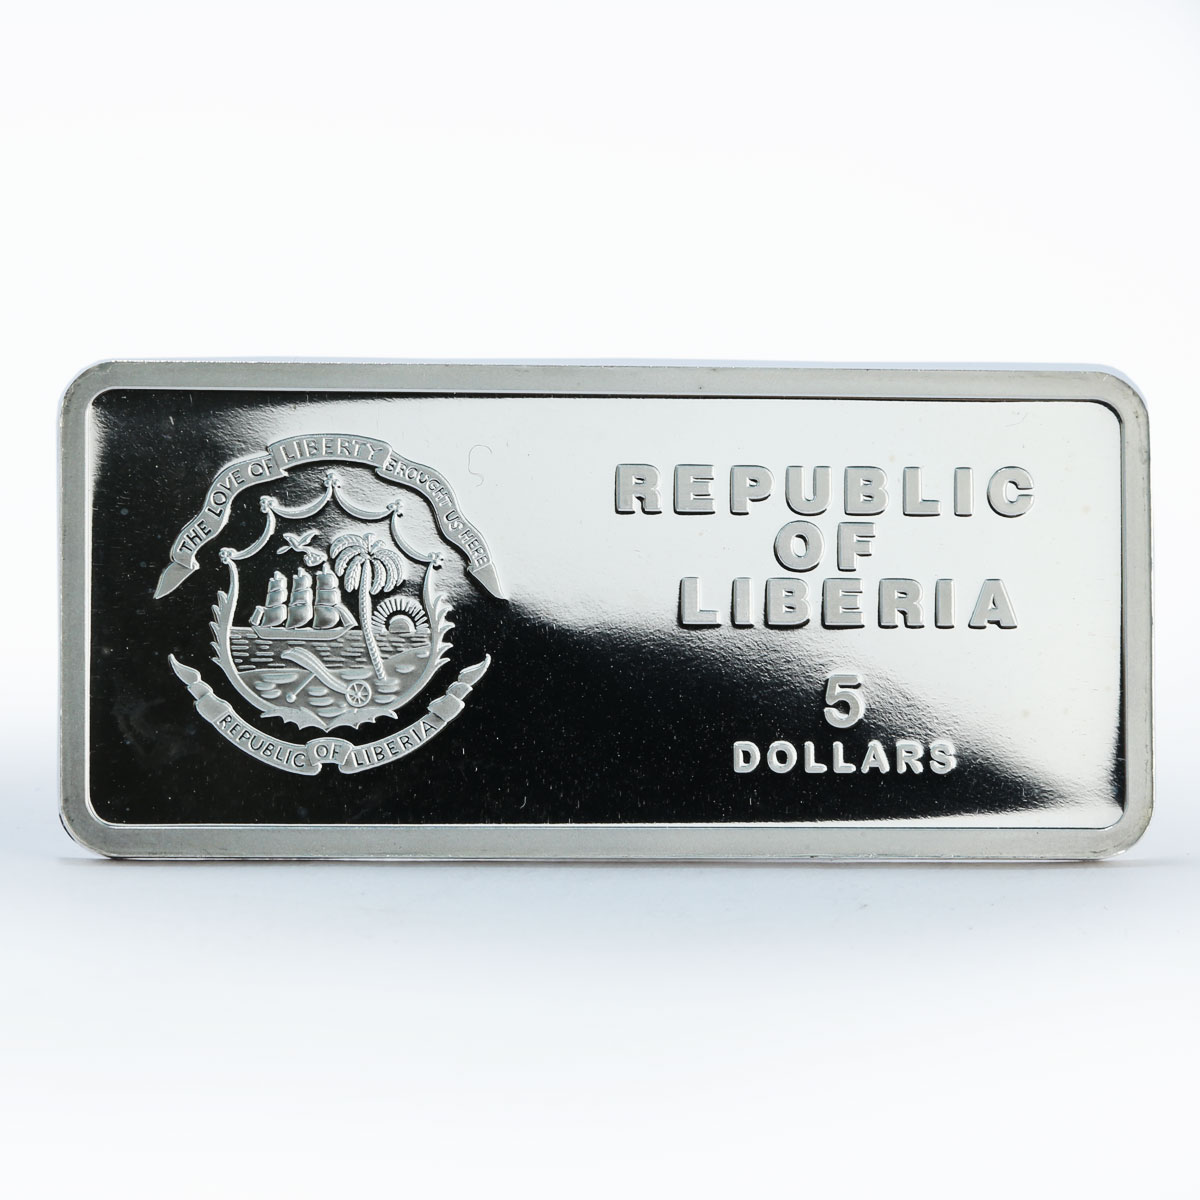 Liberia 5 dollars Year of the Tiger Lunar Rectangular colored silver coin 2010